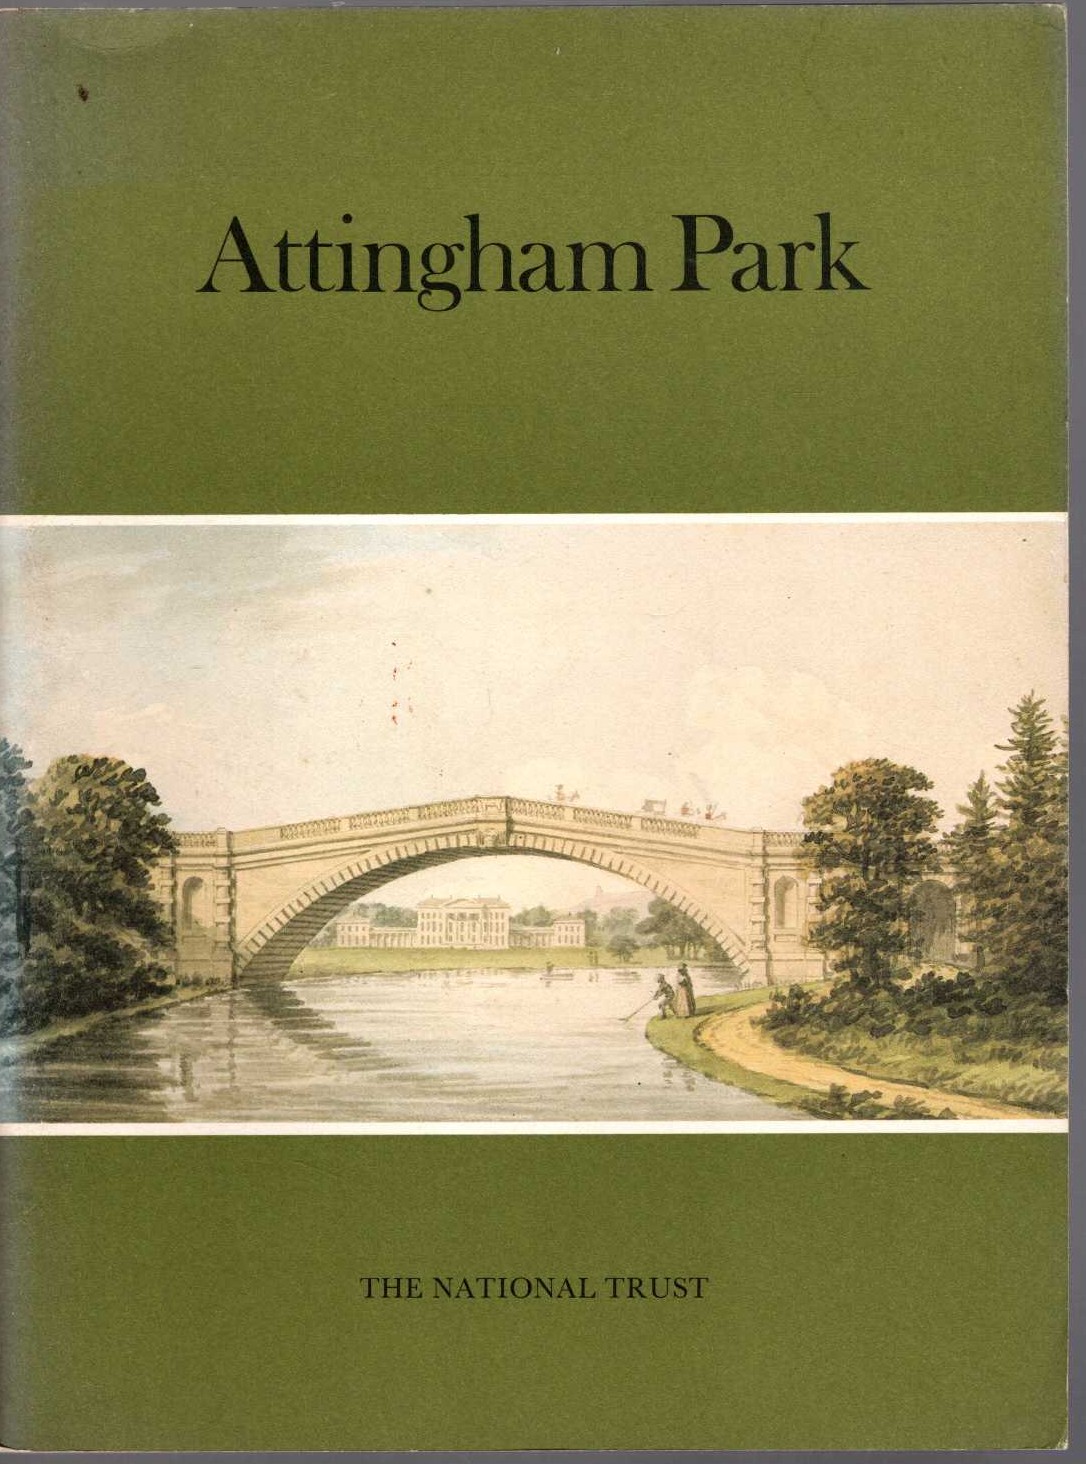 
\ ATTINGHAM PARK by The National Trust front book cover image